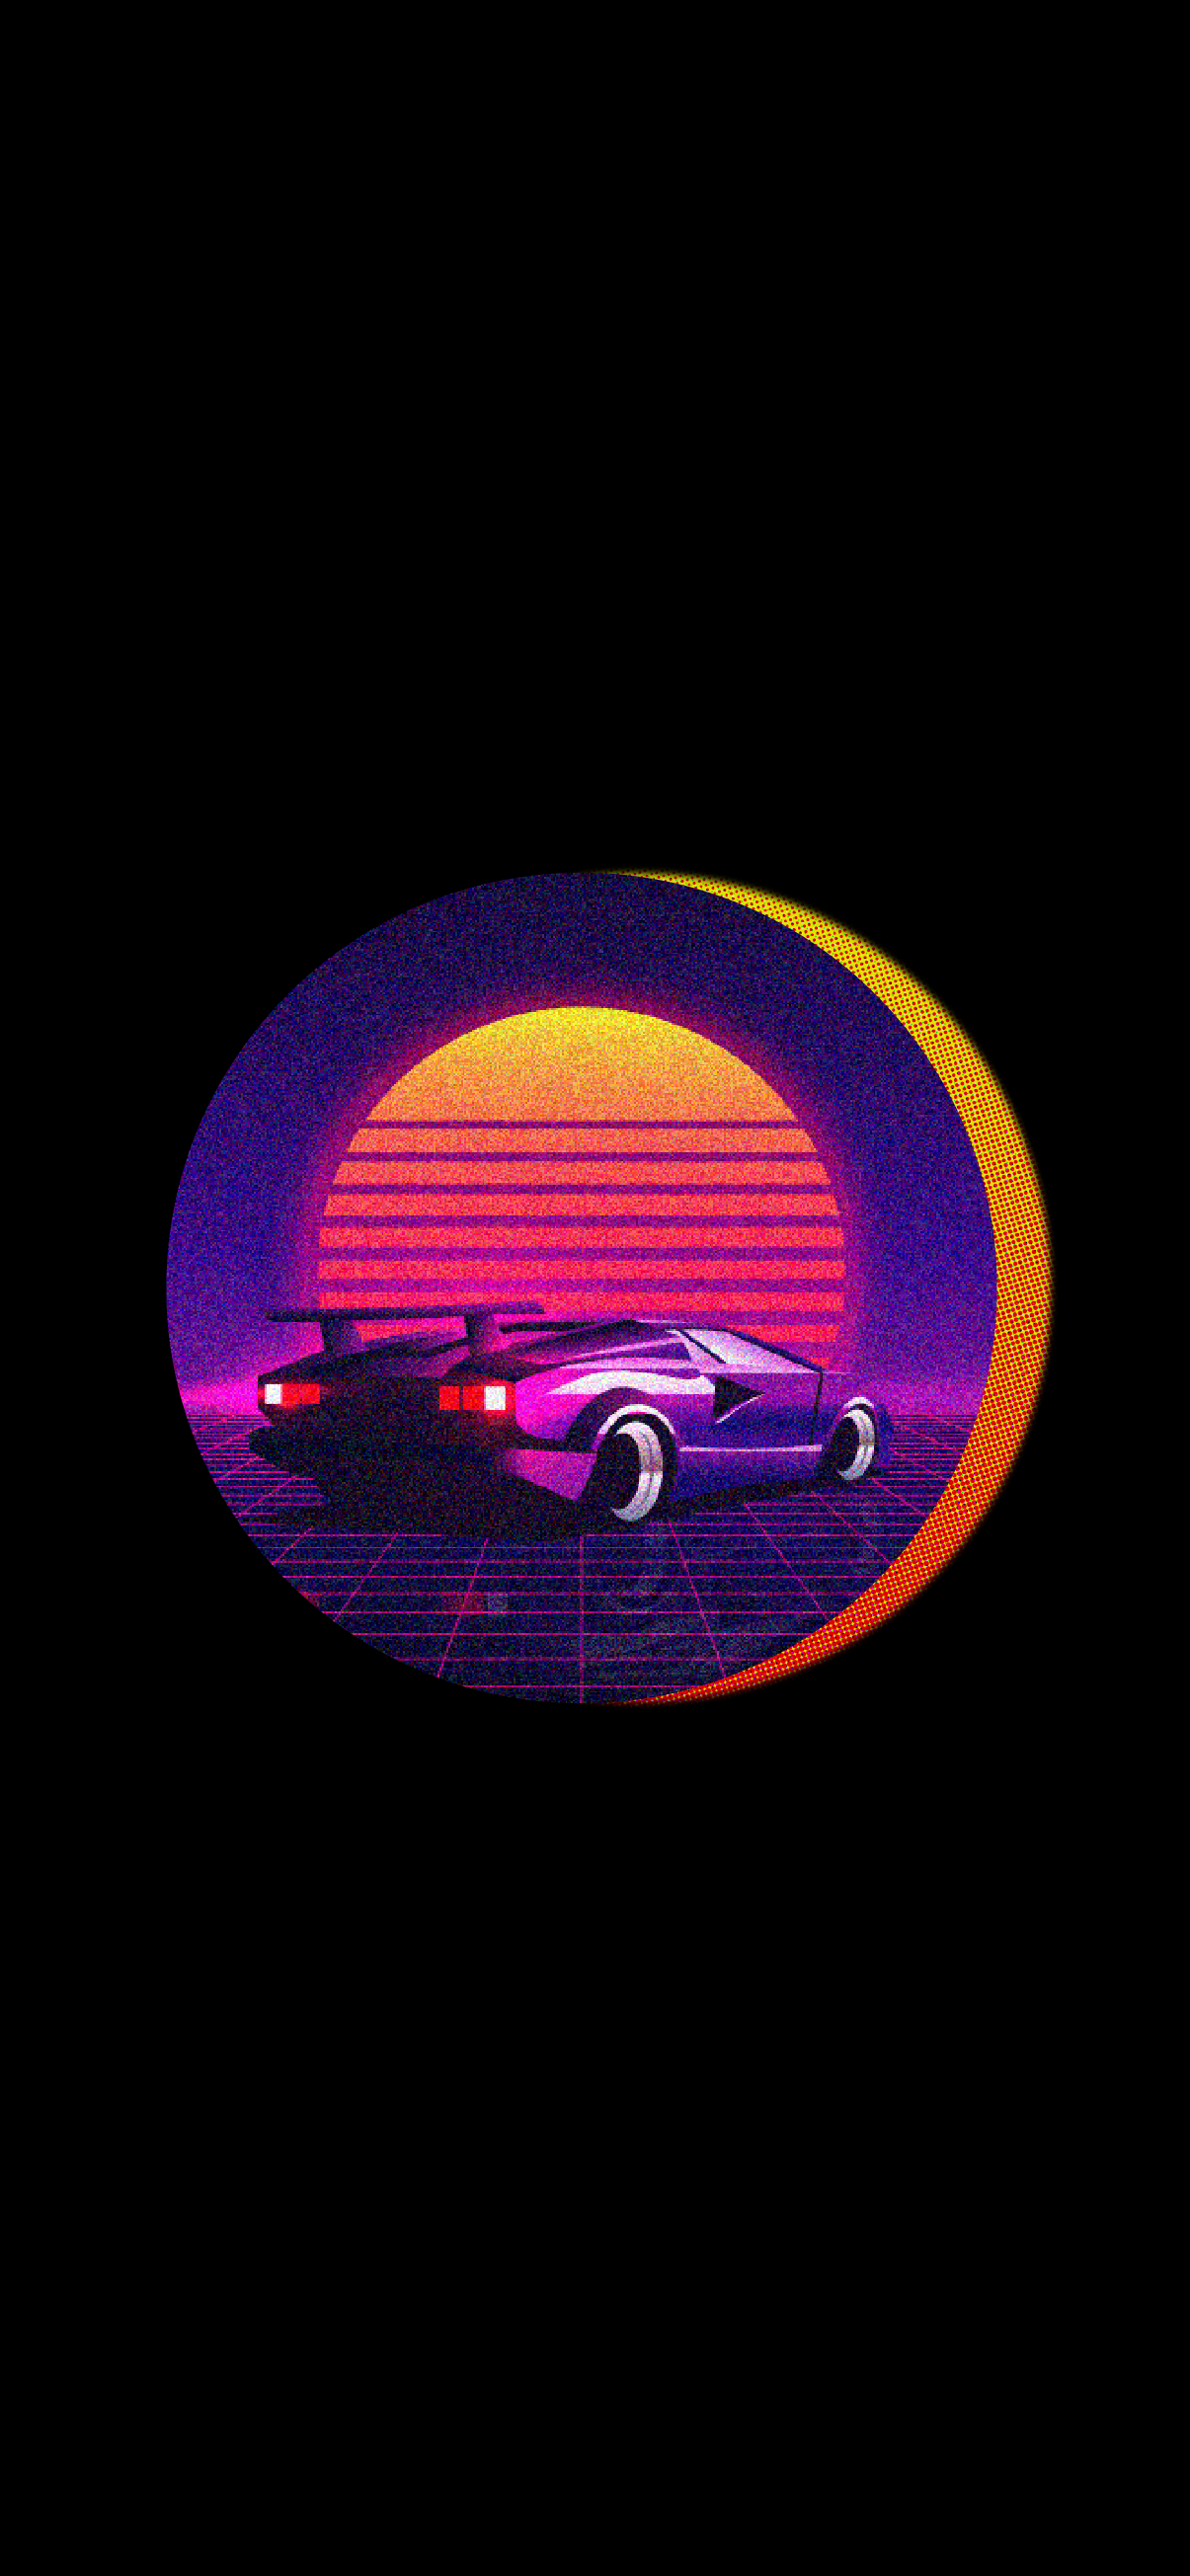 synthwave car retro style